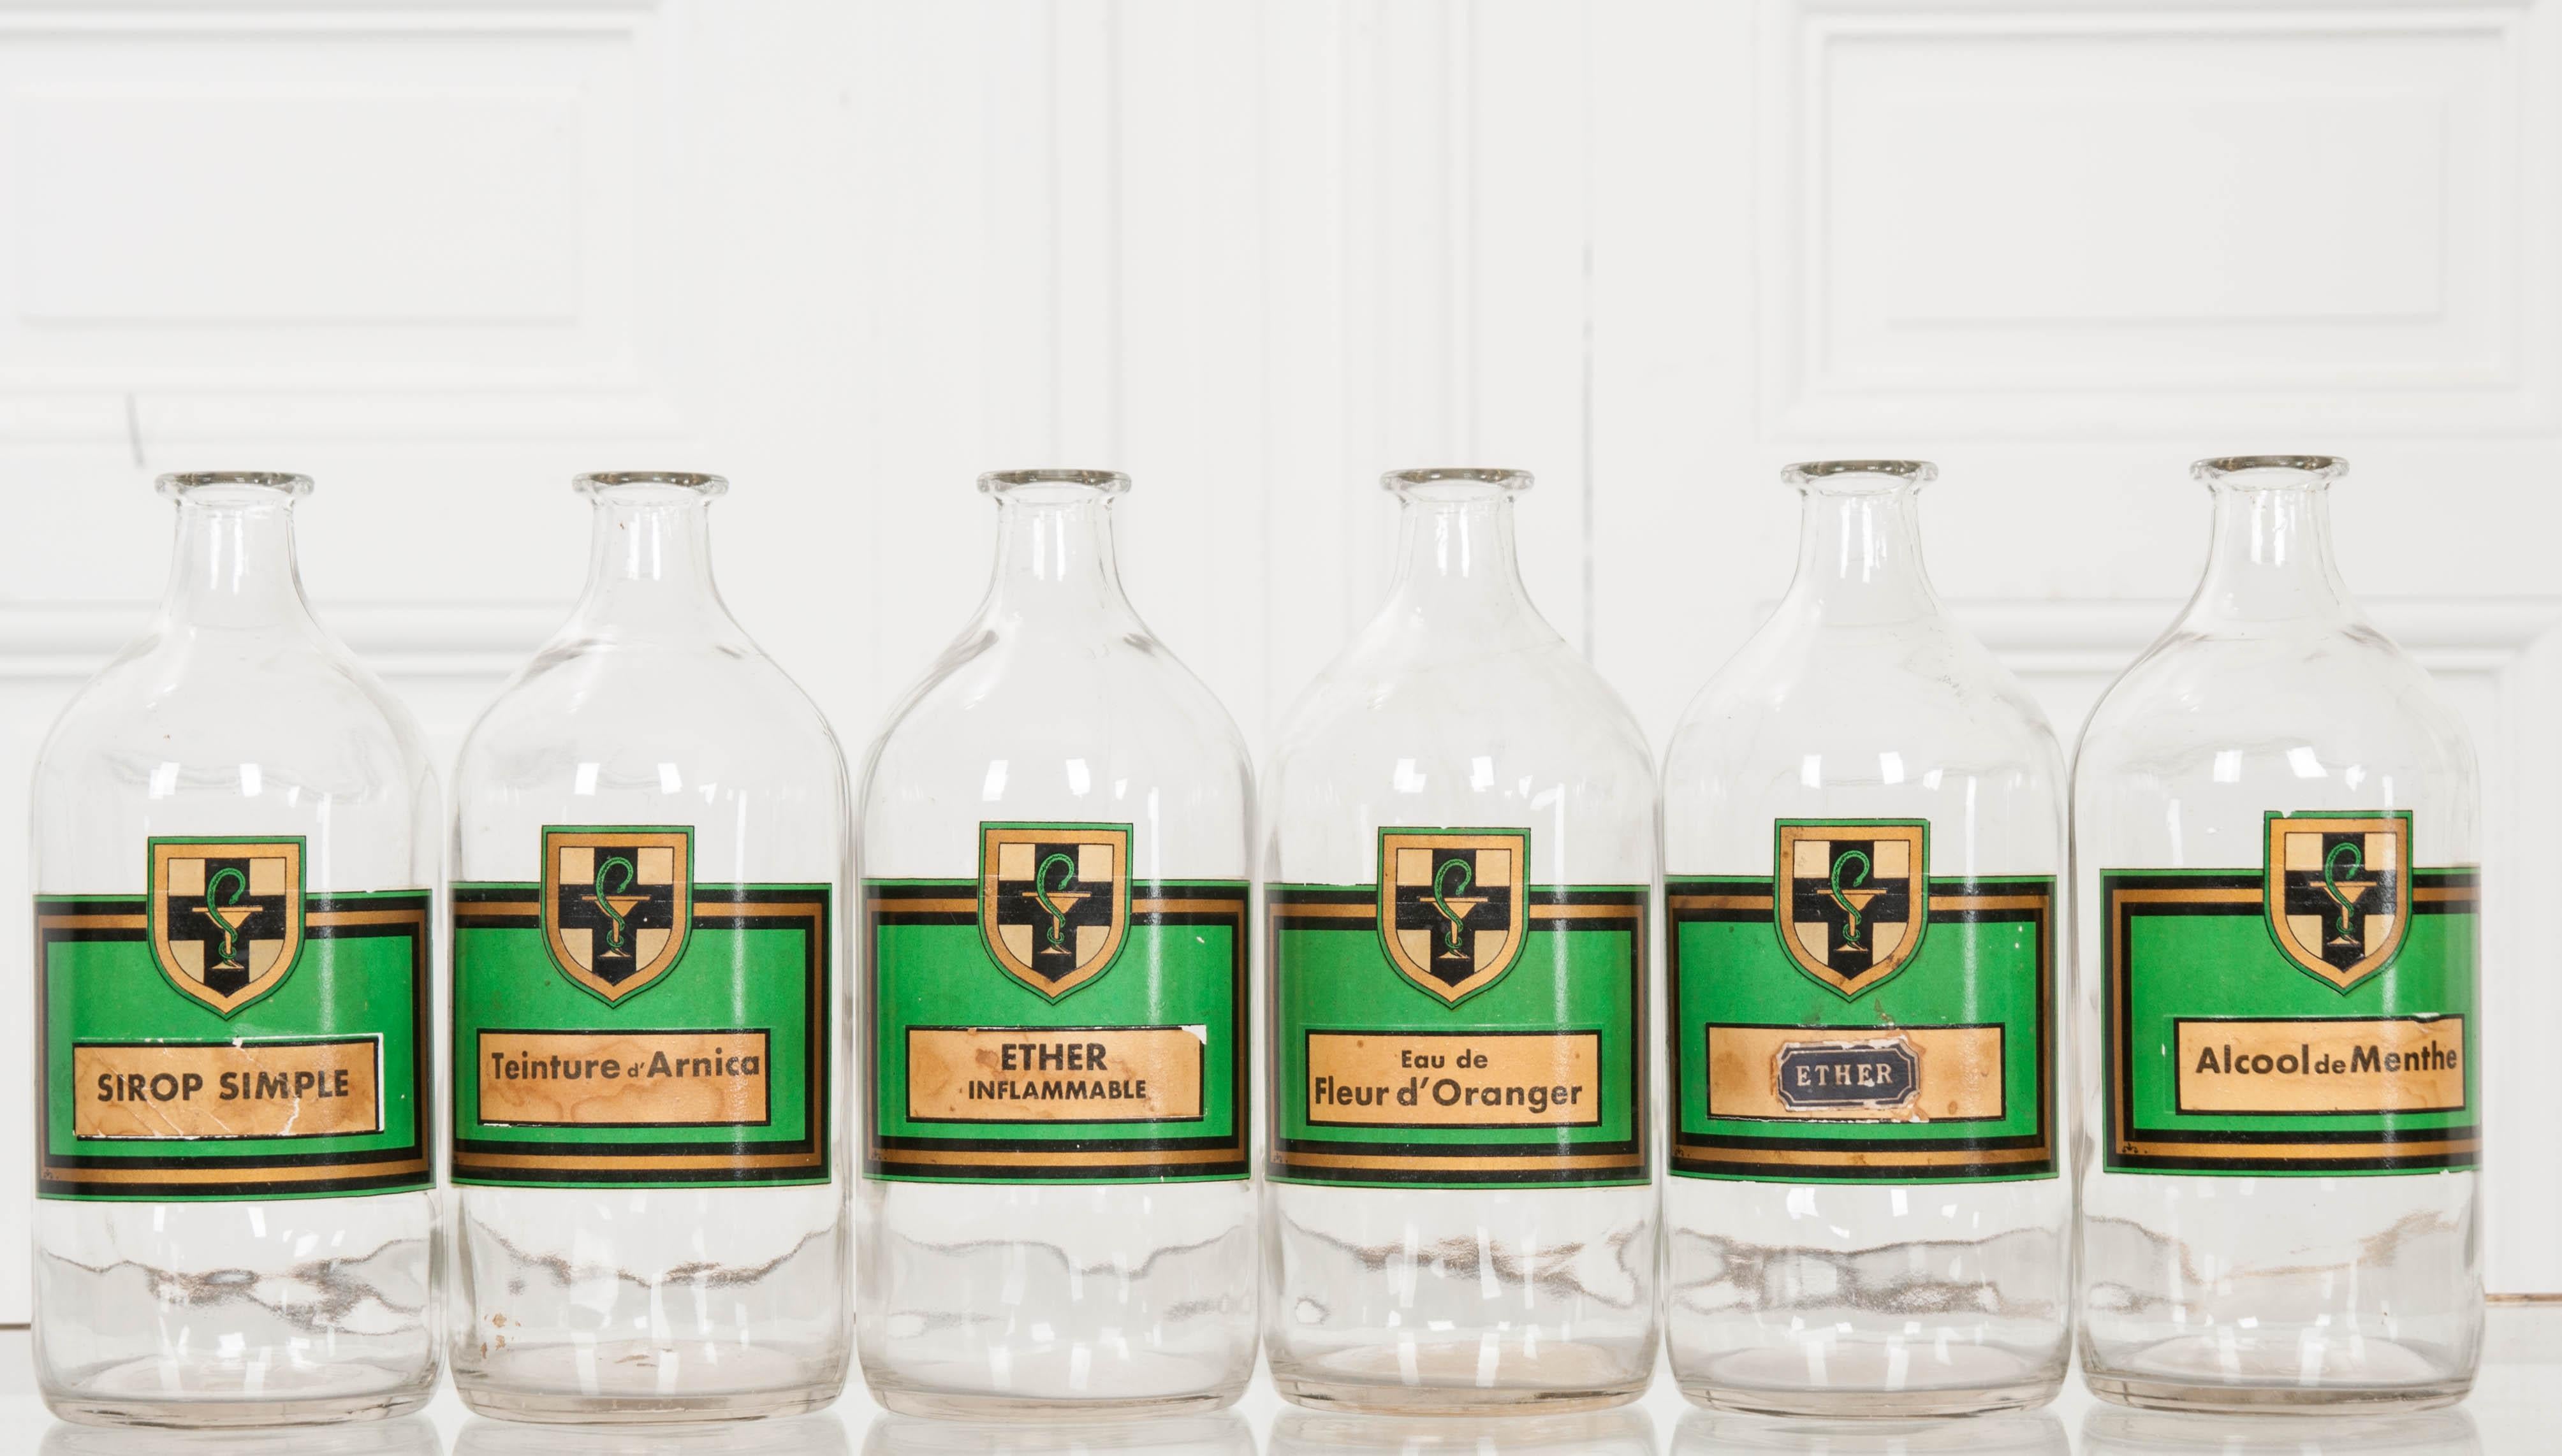 A fantastic set of six vintage apothecary bottles from a pharmacy in France. Wonderful green and gold labels are emblazoned, each with a bowl of Hygeia crest and the bottles’ contents labeled in French. Simple syrup, arnica tincture, ether (both